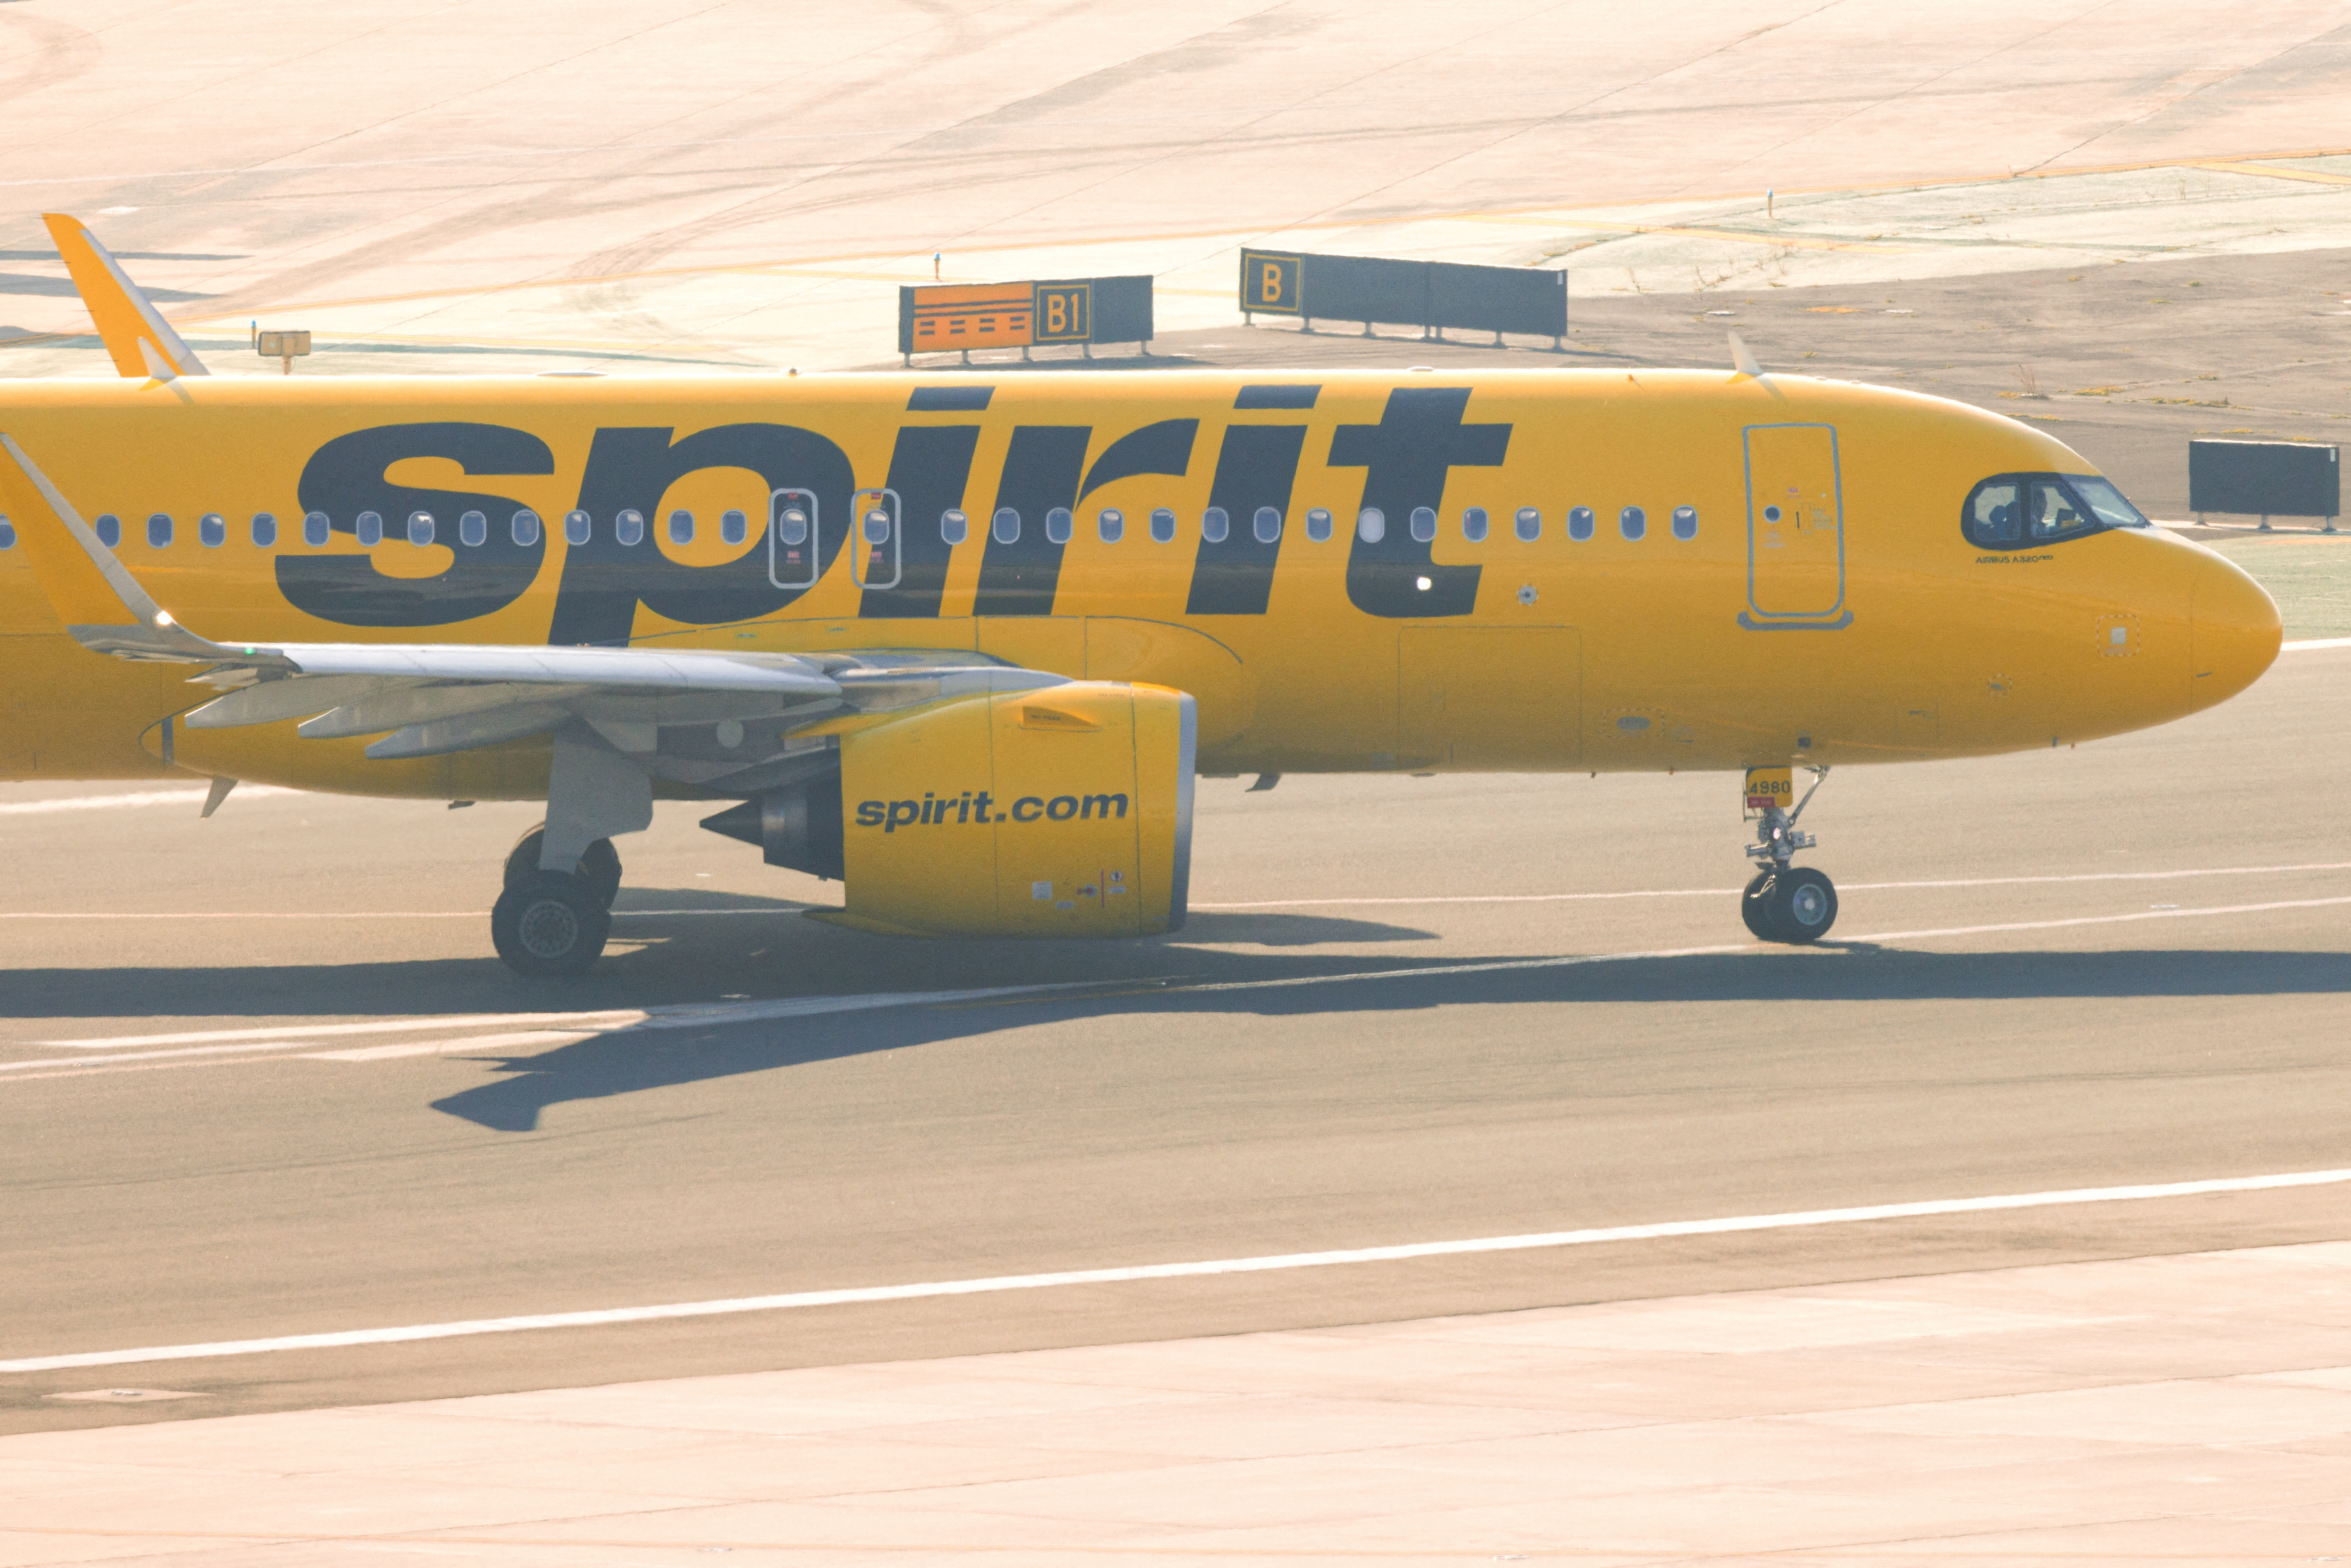 Spirit Airlines aircraft departs after acquisition by JetBlue Airways blocked by federal judge